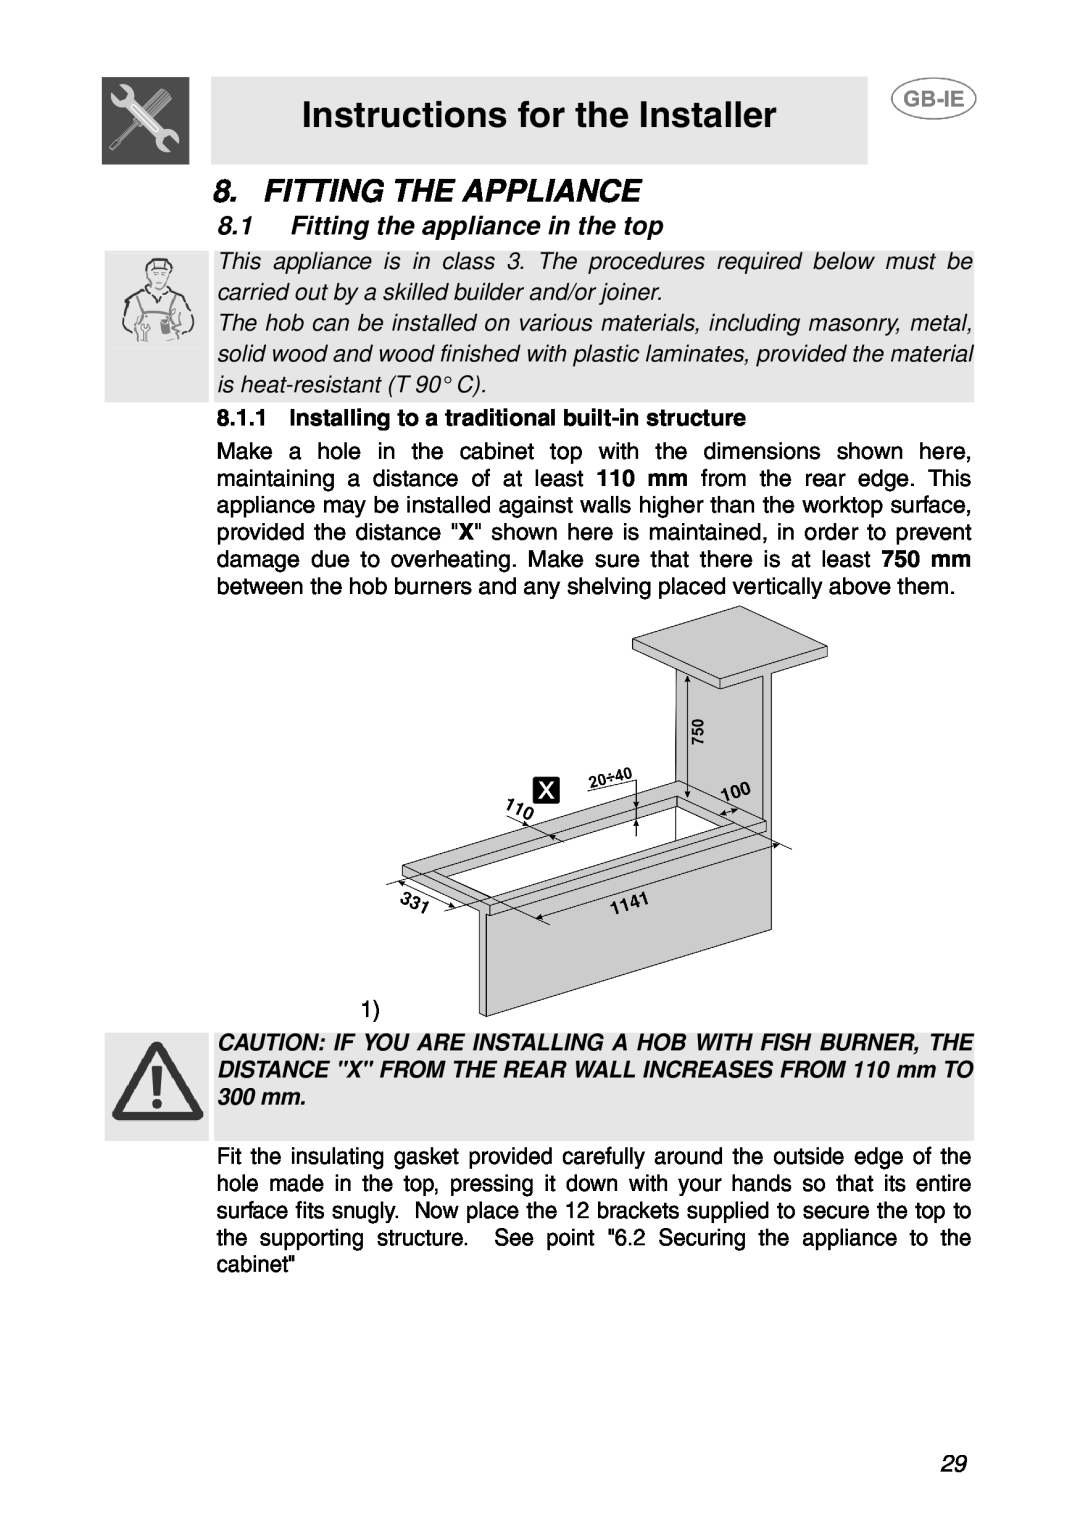 Smeg GD100XG manual Instructions for the Installer, Fitting The Appliance, Fitting the appliance in the top 